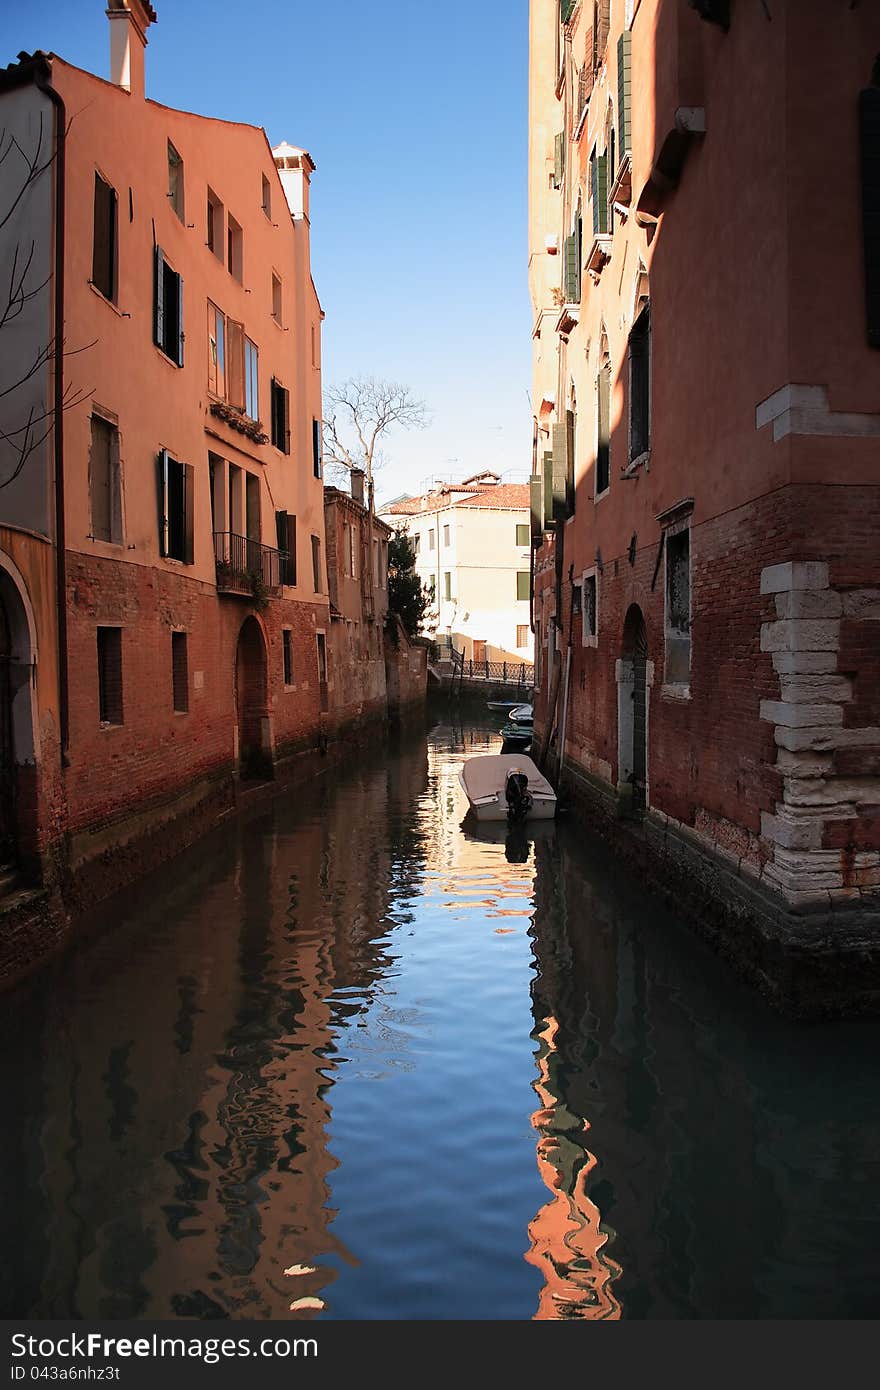 Few boats on a narrow canal between old buildings. Venice, Italy. Few boats on a narrow canal between old buildings. Venice, Italy